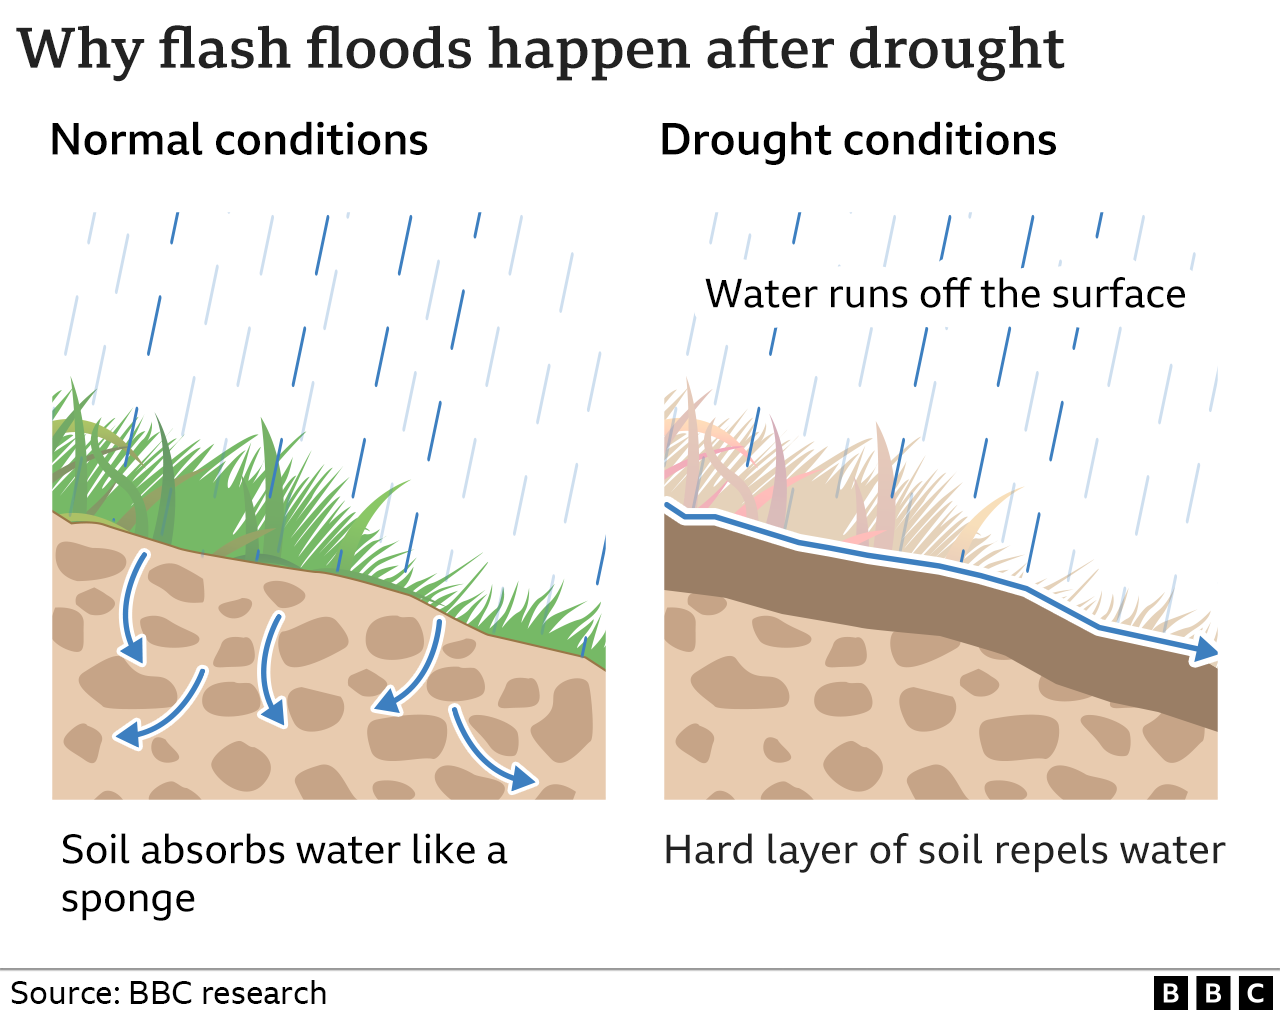 Graphic showing water run-off on drought-affected soils